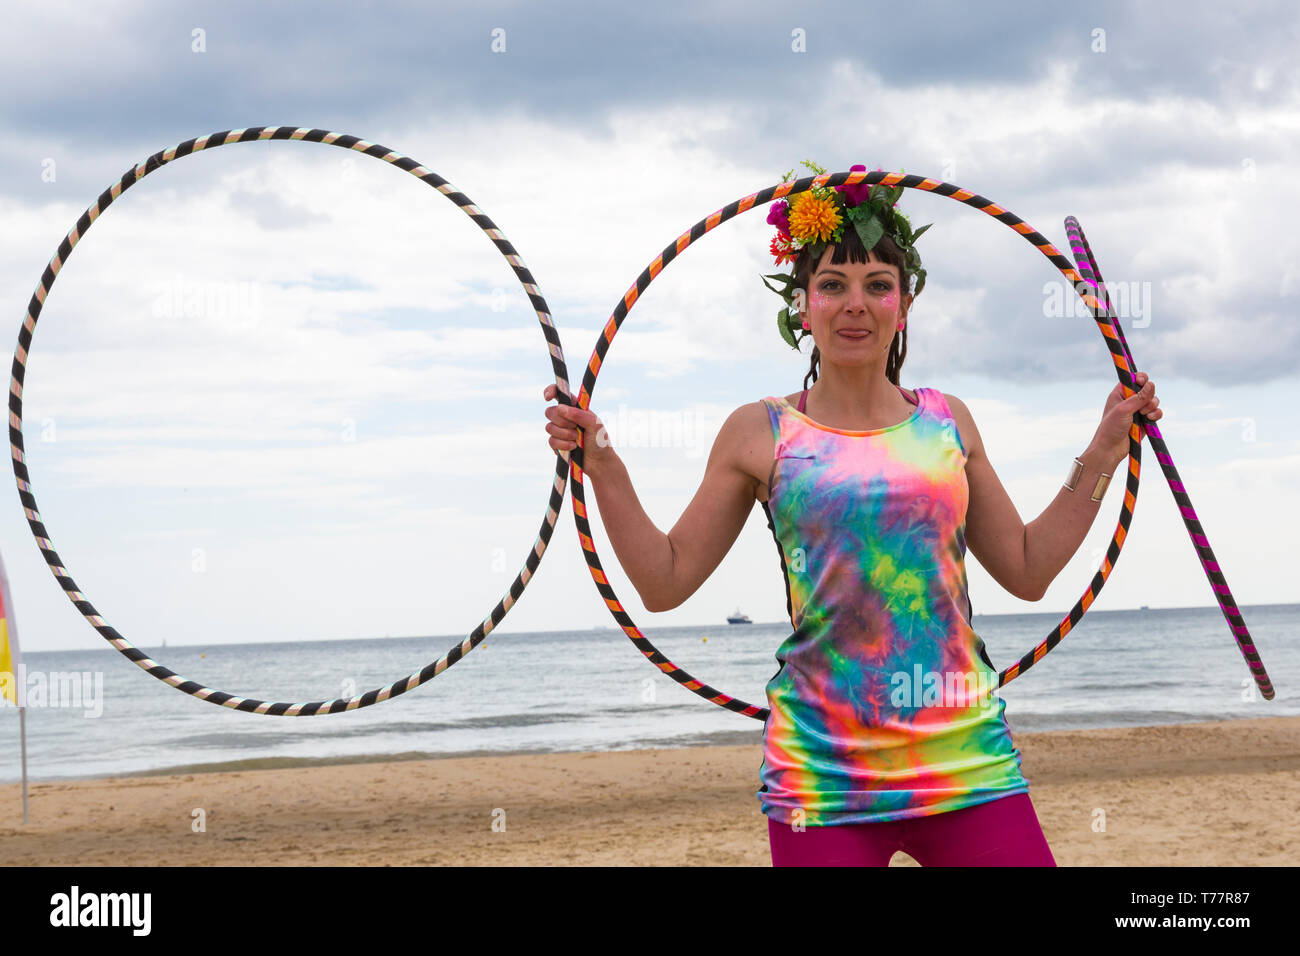 Boscombe, Bournemouth, Dorset, UK. 5th May 2019. Bournemouth Emerging Arts Fringe (BEAF) Festival attracts visitors at Boscombe. Reefiesta Urban Reef tropical tiki takeover - Lottie Lucid with her hula hoops. Credit: Carolyn Jenkins/Alamy Live News Stock Photo